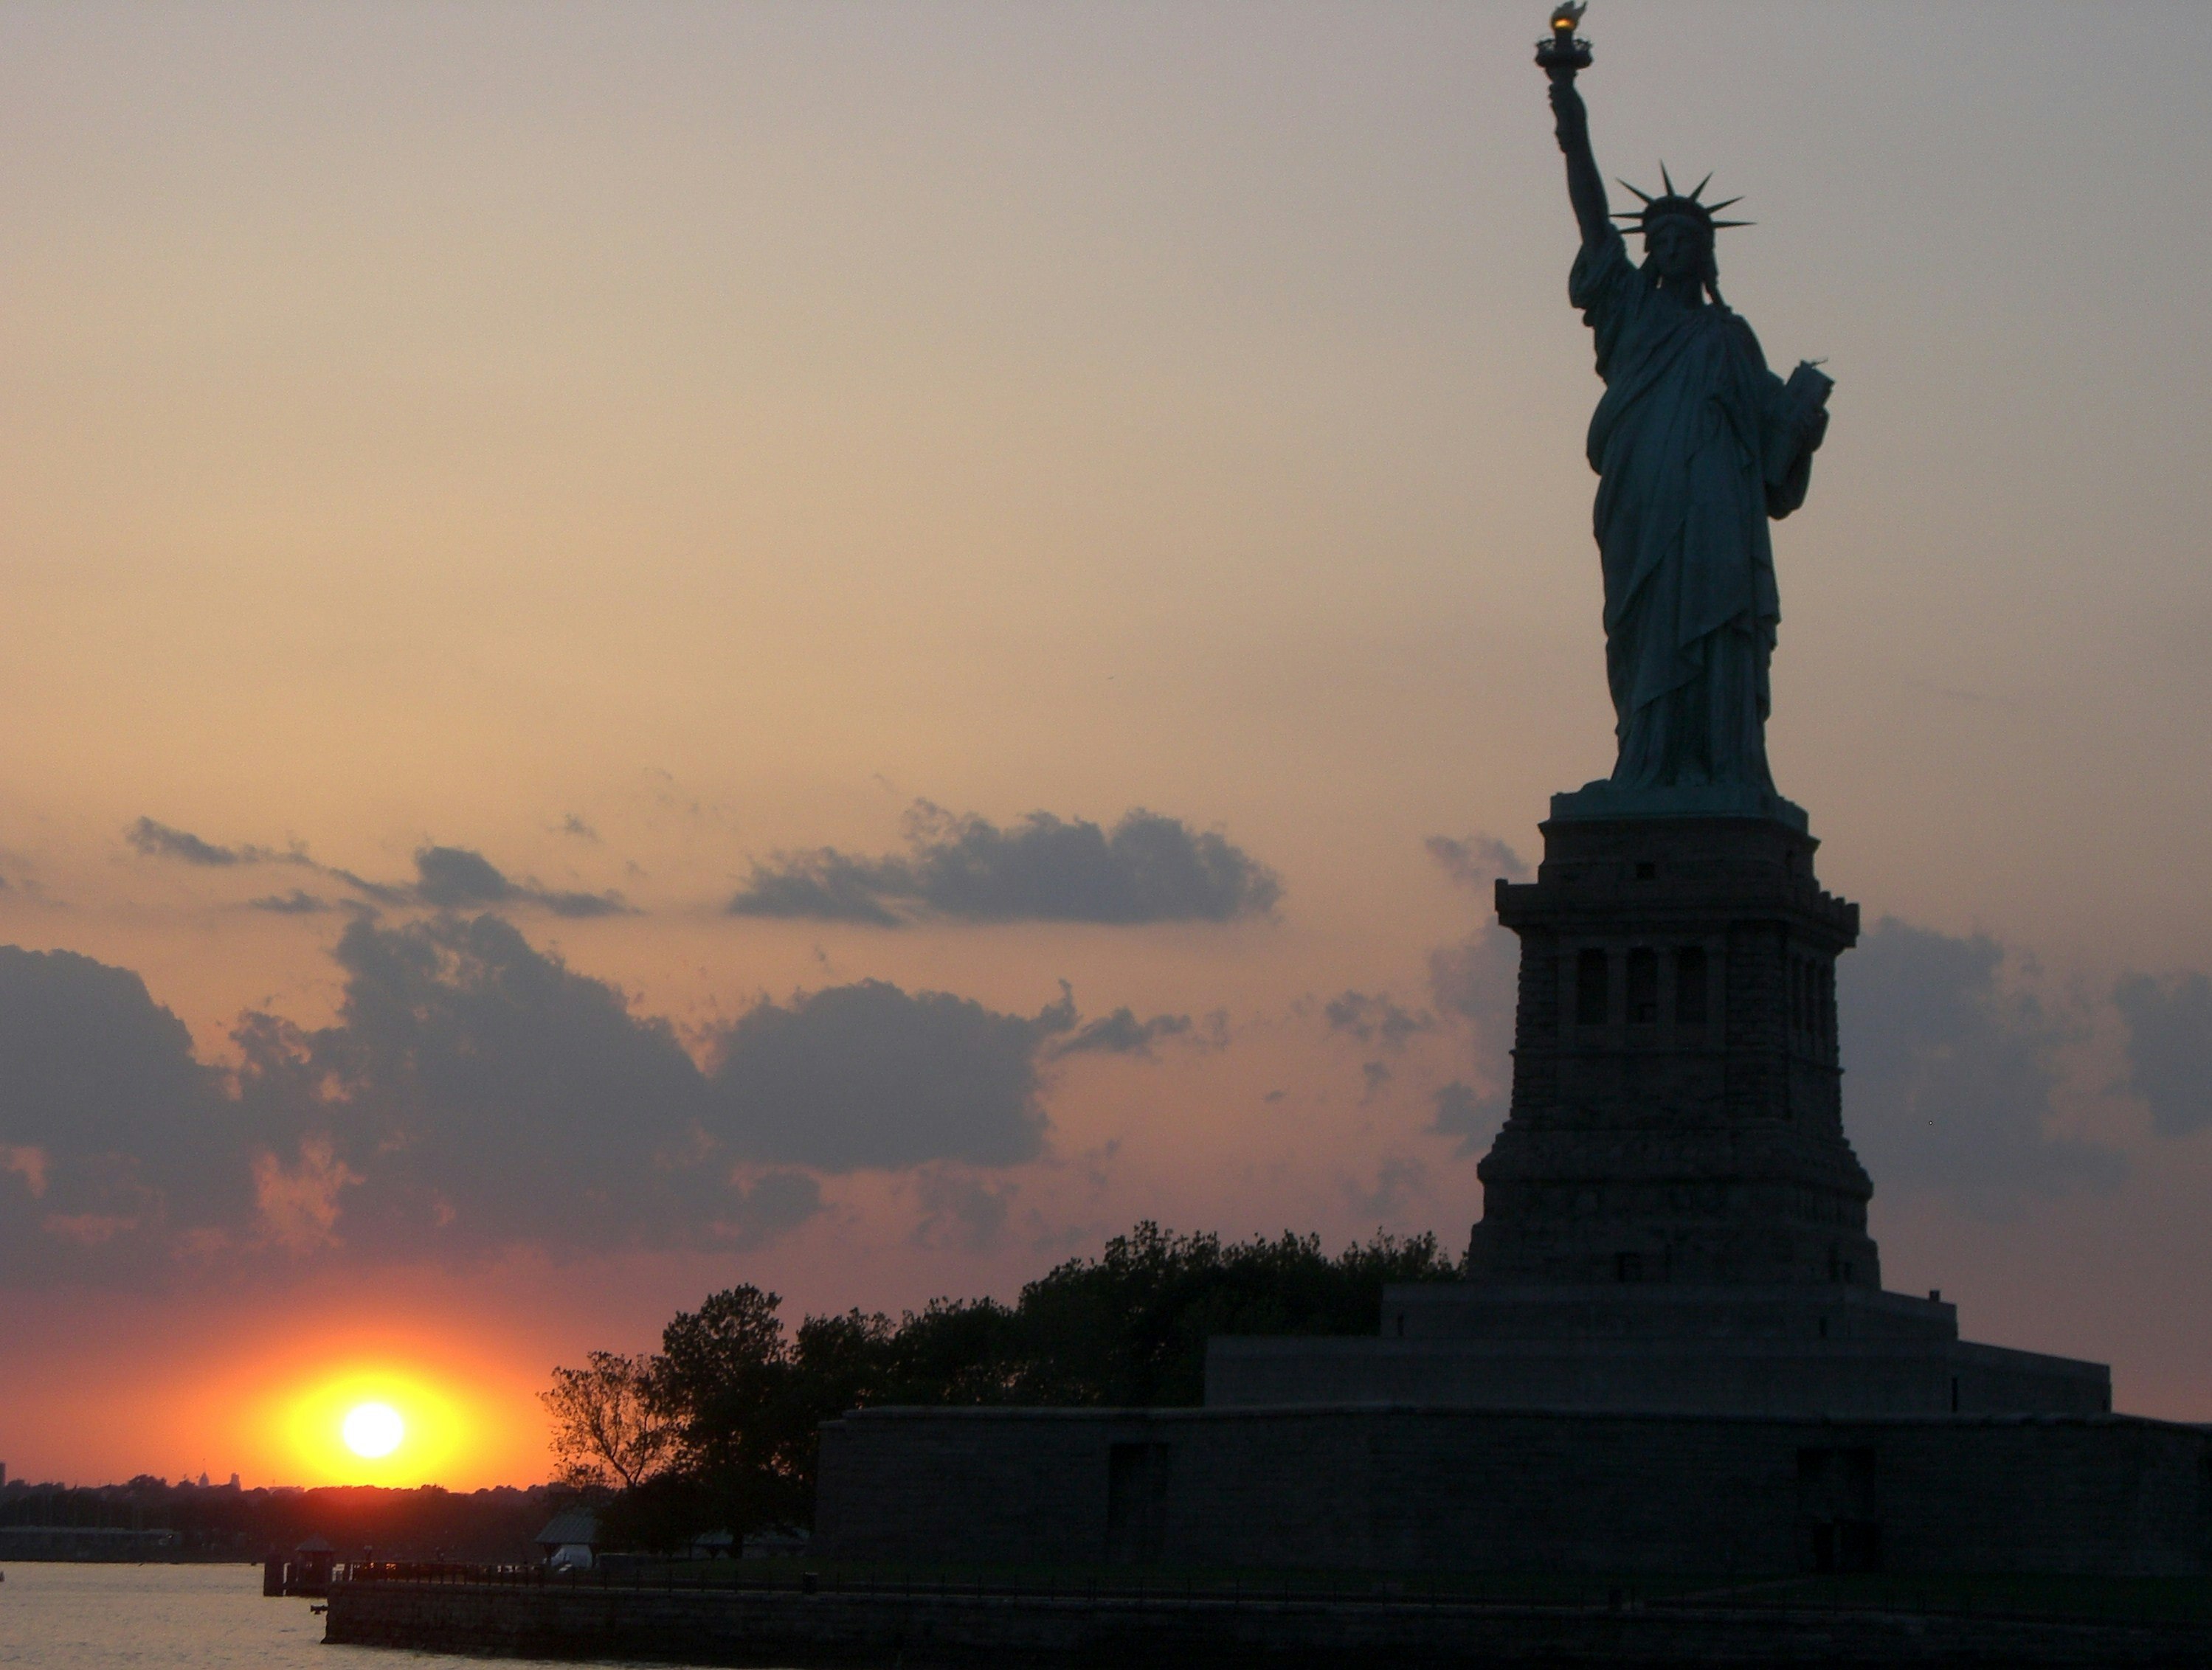 The Statue of Liberty is silhouette as the sun sets in New York.  